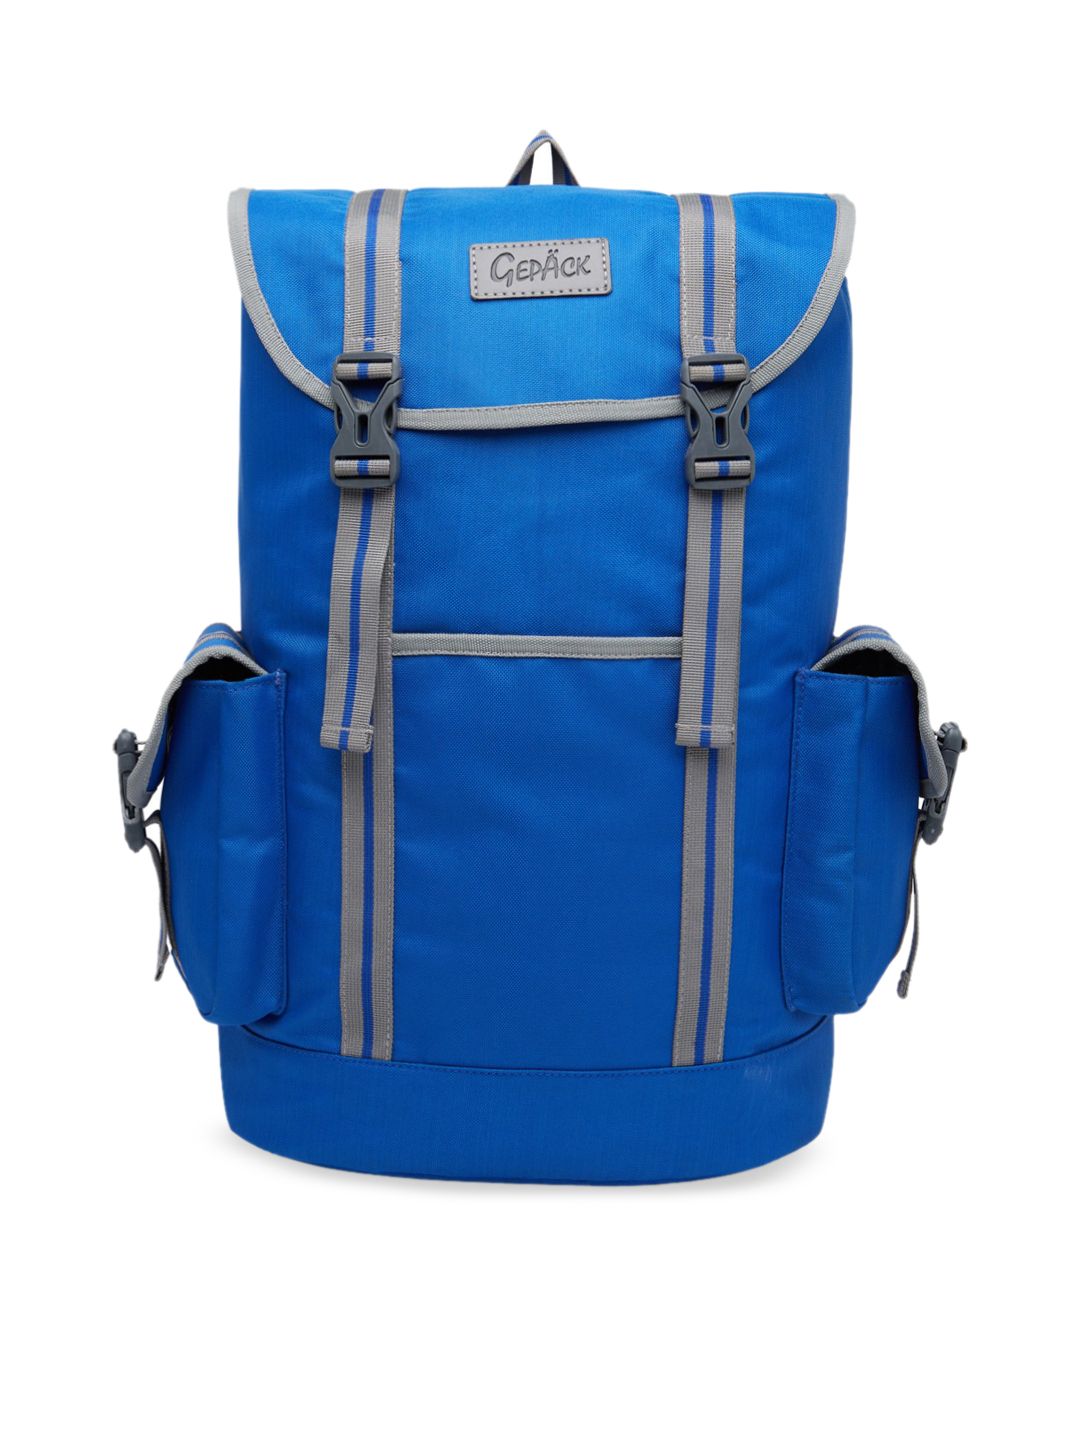 GEPACK by BagsRus 30cm Royal Blue Polyester Fashion Backpack Travel Bag Price in India